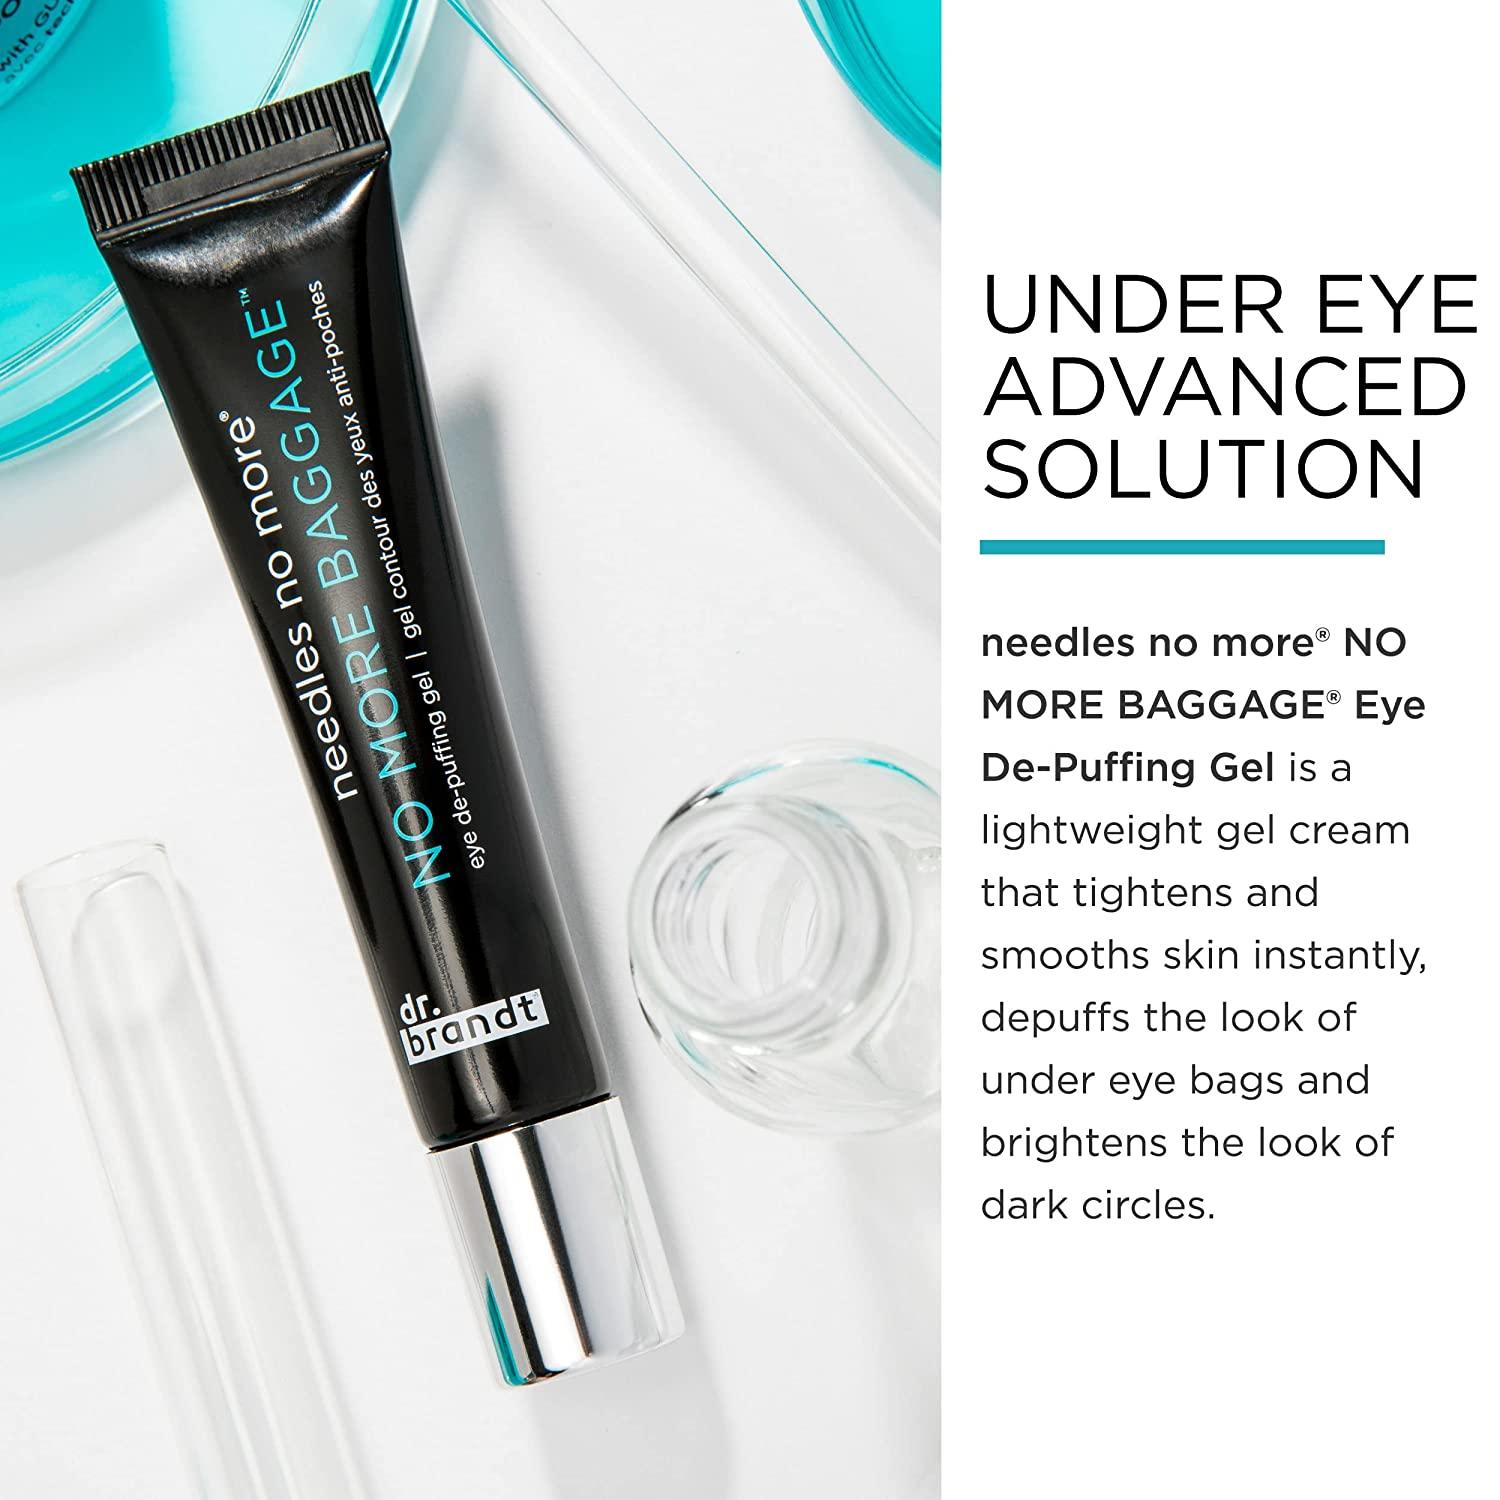 Anti-Puffiness Eye Gel - Dr. Brandt Needles No More No More